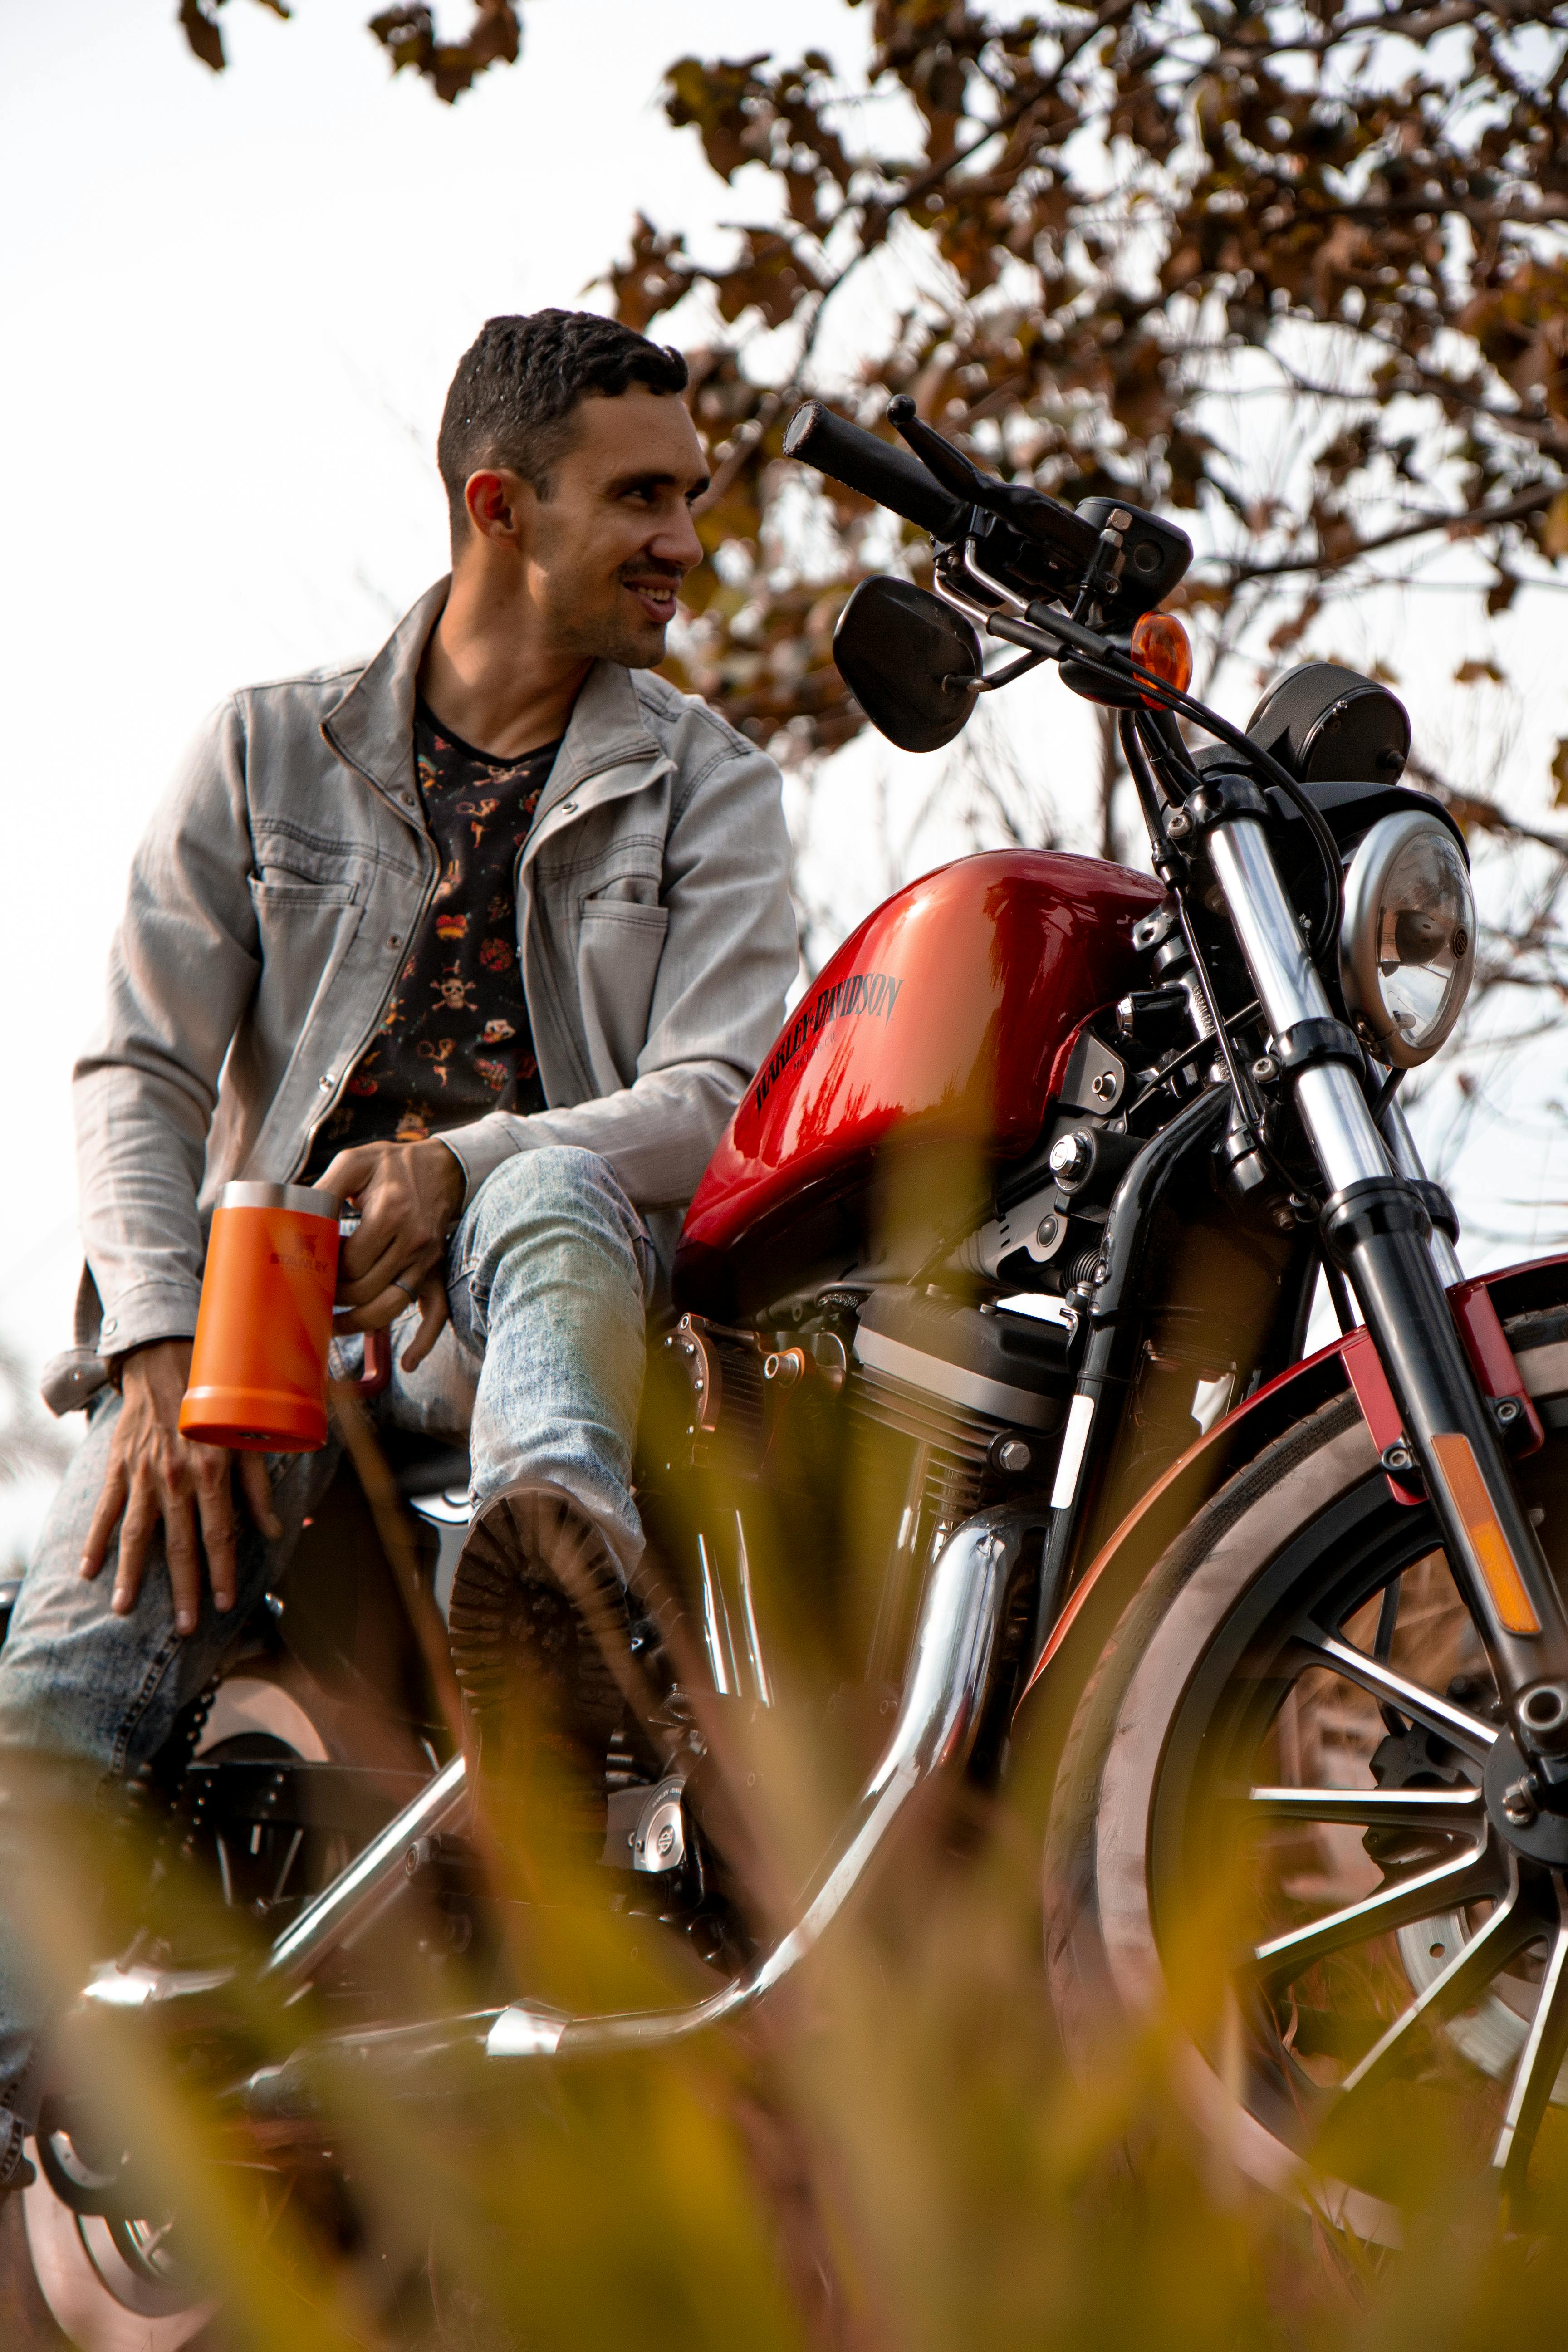 Men Dress And Pose As Ducati Motorcycle Models (PHOTOS) | HuffPost Style